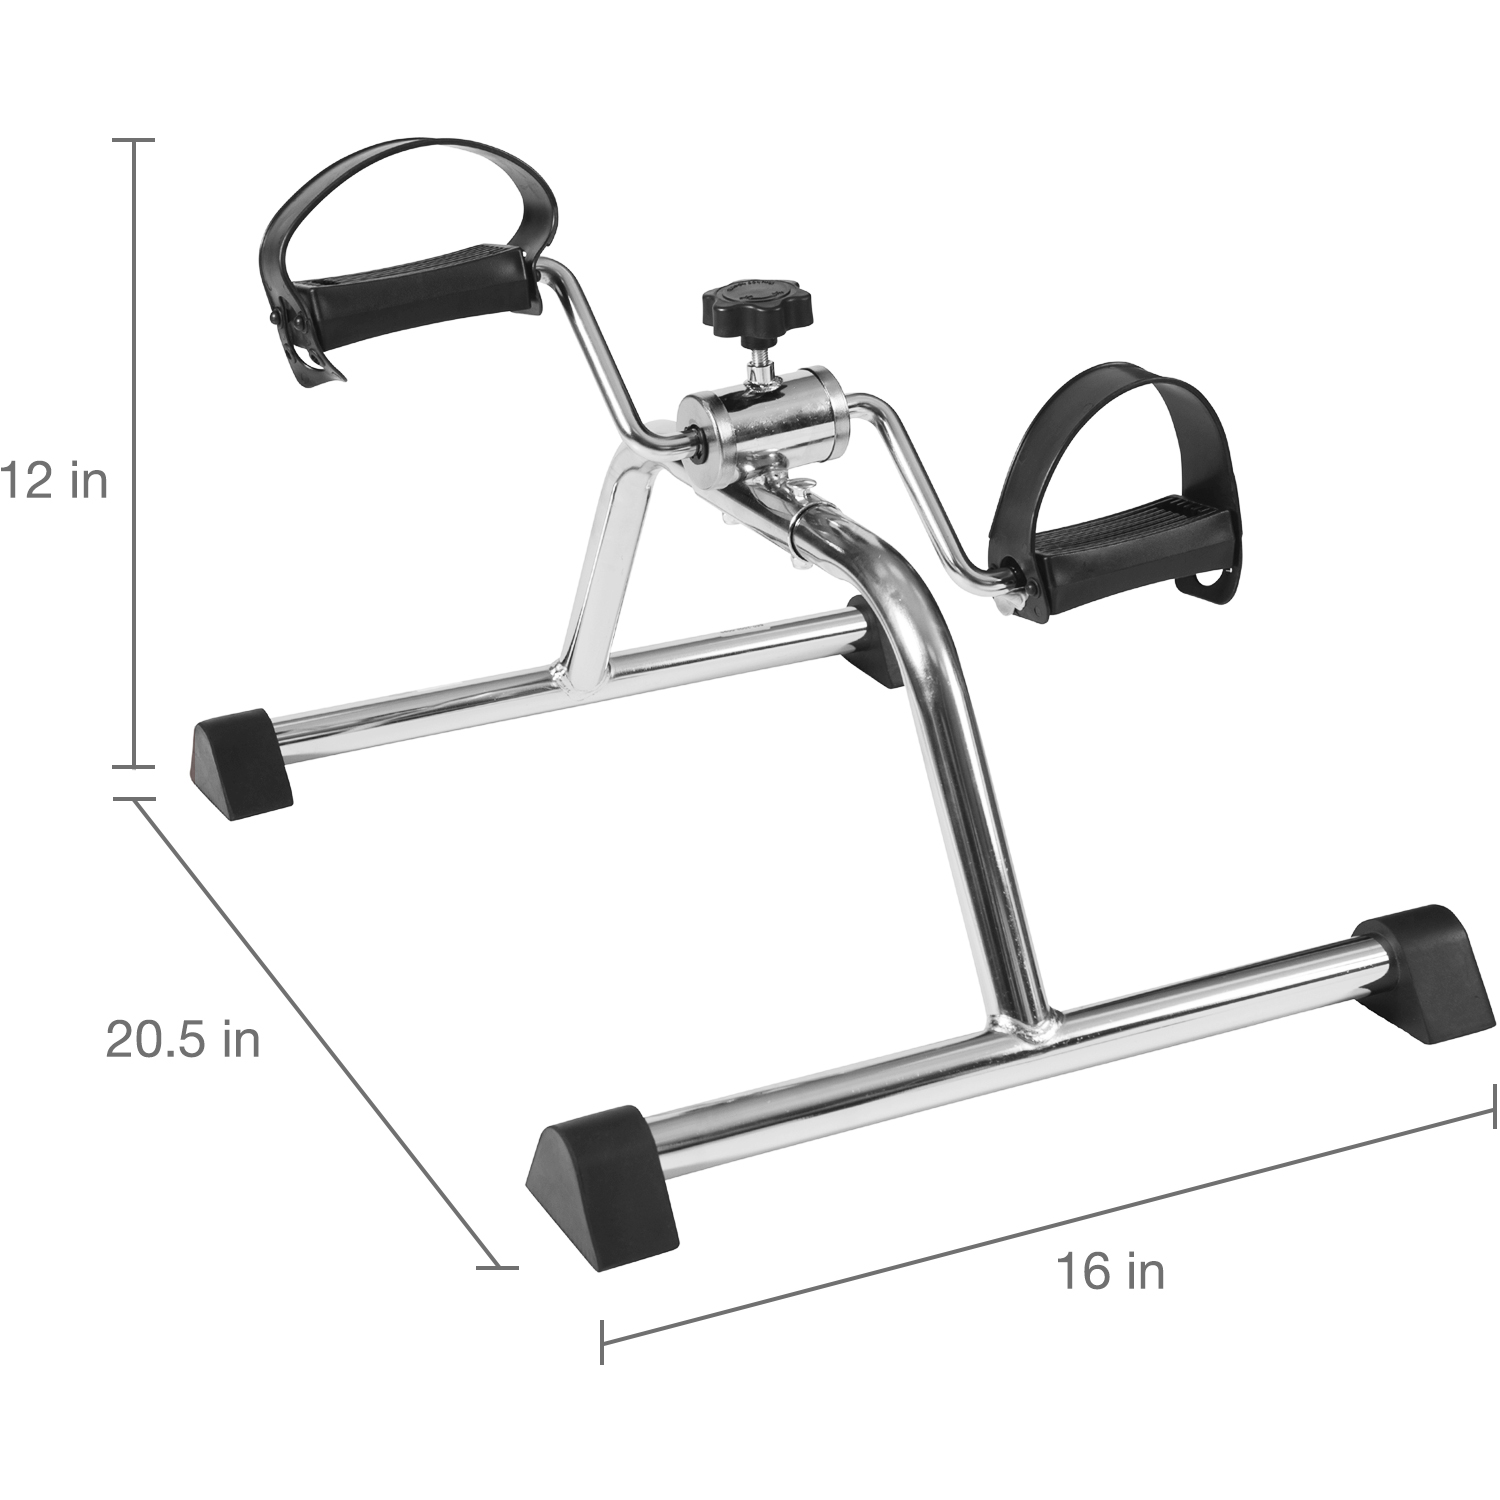 DMI Lightweight Mini Pedal Exerciser for Arms and Legs - image 4 of 5